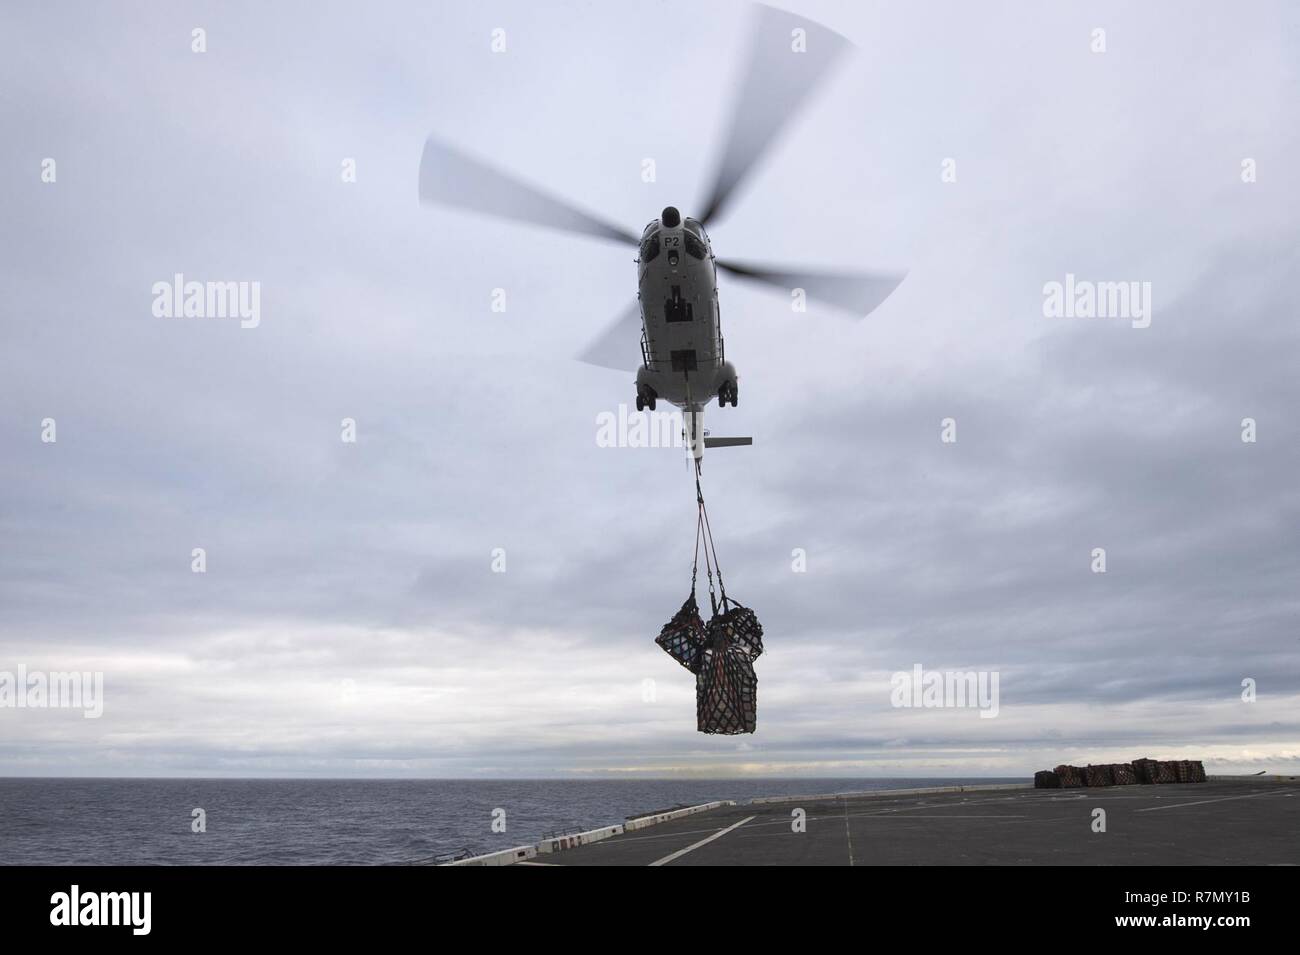 EAST CHINA SEA (March 20, 2017) An SA-330J Puma helicopter, assigned to the Military Sealift Command dry cargo and ammunition ship USNS Richard E. Byrd (T-AKE 4), approaches the flight deck of the amphibious transport dock ship USS Green Bay (LPD 20) during a vertical replenishment. Green Bay, part of the Bonhomme Richard Expeditionary Strike Group, with embarked 31st Marine Expeditionary Unit, is on a routine patrol, operating in the Indo-Asia-Pacific region to enhance warfighting readiness and posture forward as a ready-response force for any type of contingency. Stock Photo